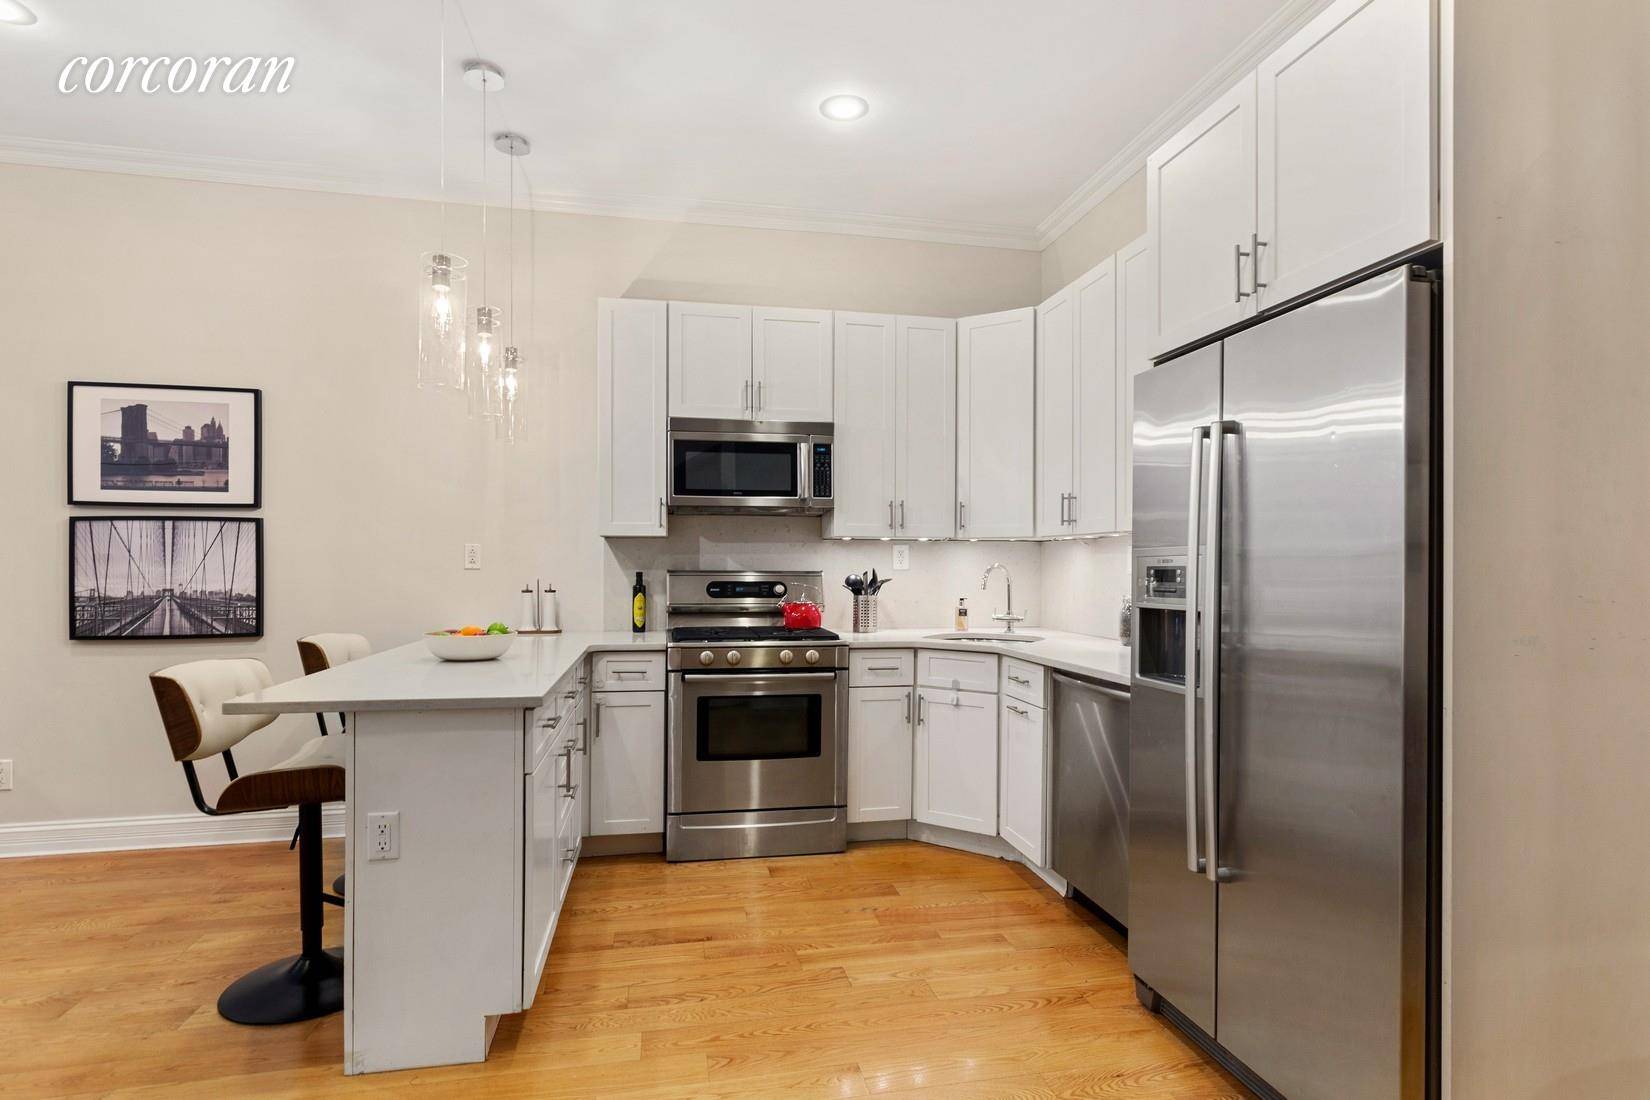 In a four unit brownstone in the heart of North Park Slope, this sprawling, renovated and well designed DUPLEX apartment offers wonderful living space on TWO FULL FLOORS plus more ...